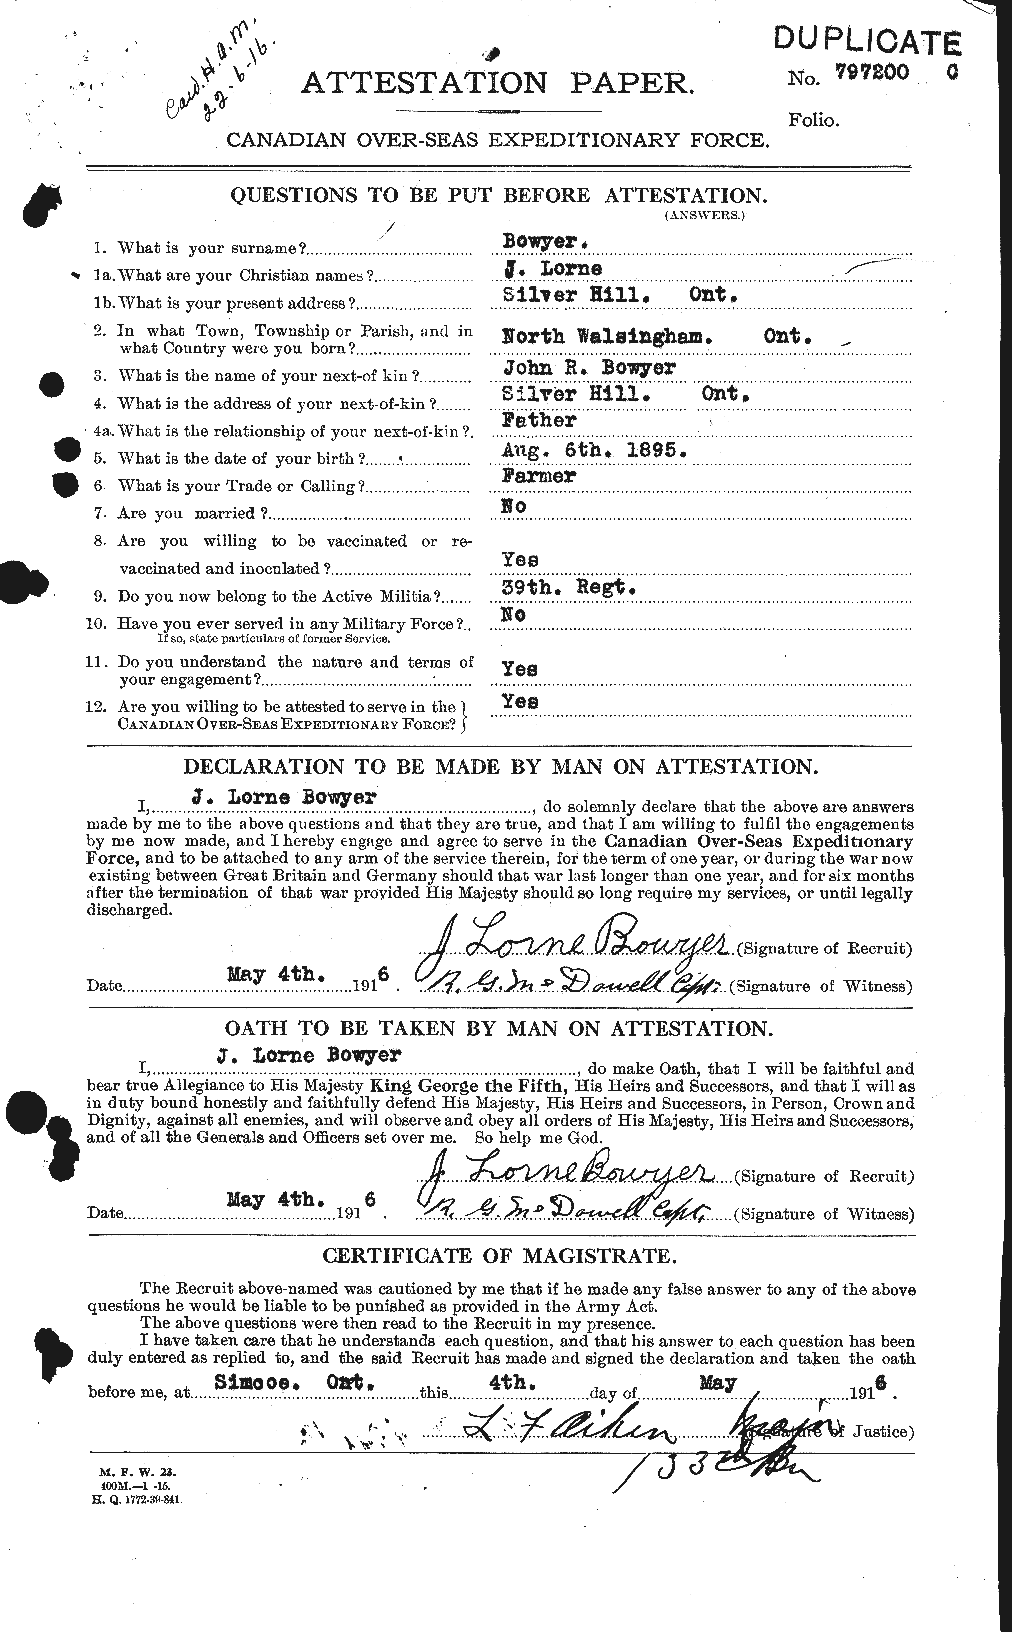 Personnel Records of the First World War - CEF 256313a